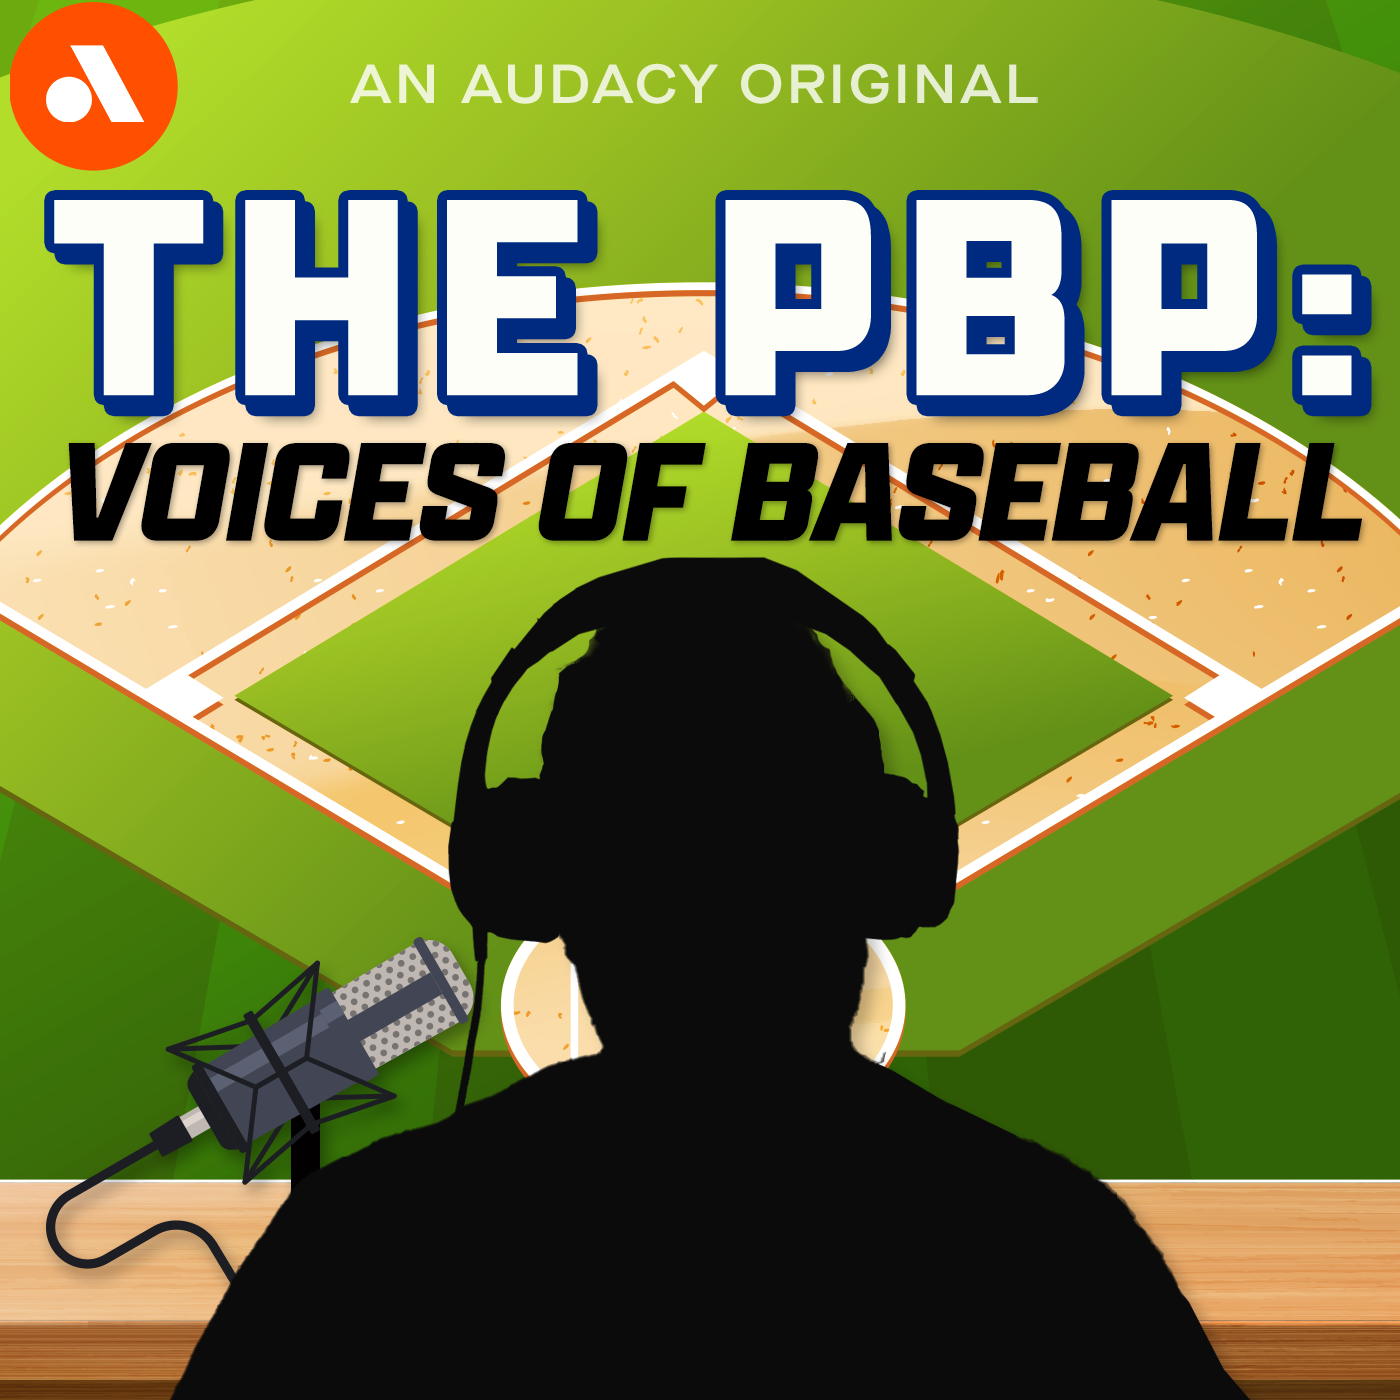 Media Critic Richard Deitsch Weighs In on the State of Baseball Play-by-Play | 'The PBP: Voices of Baseball'